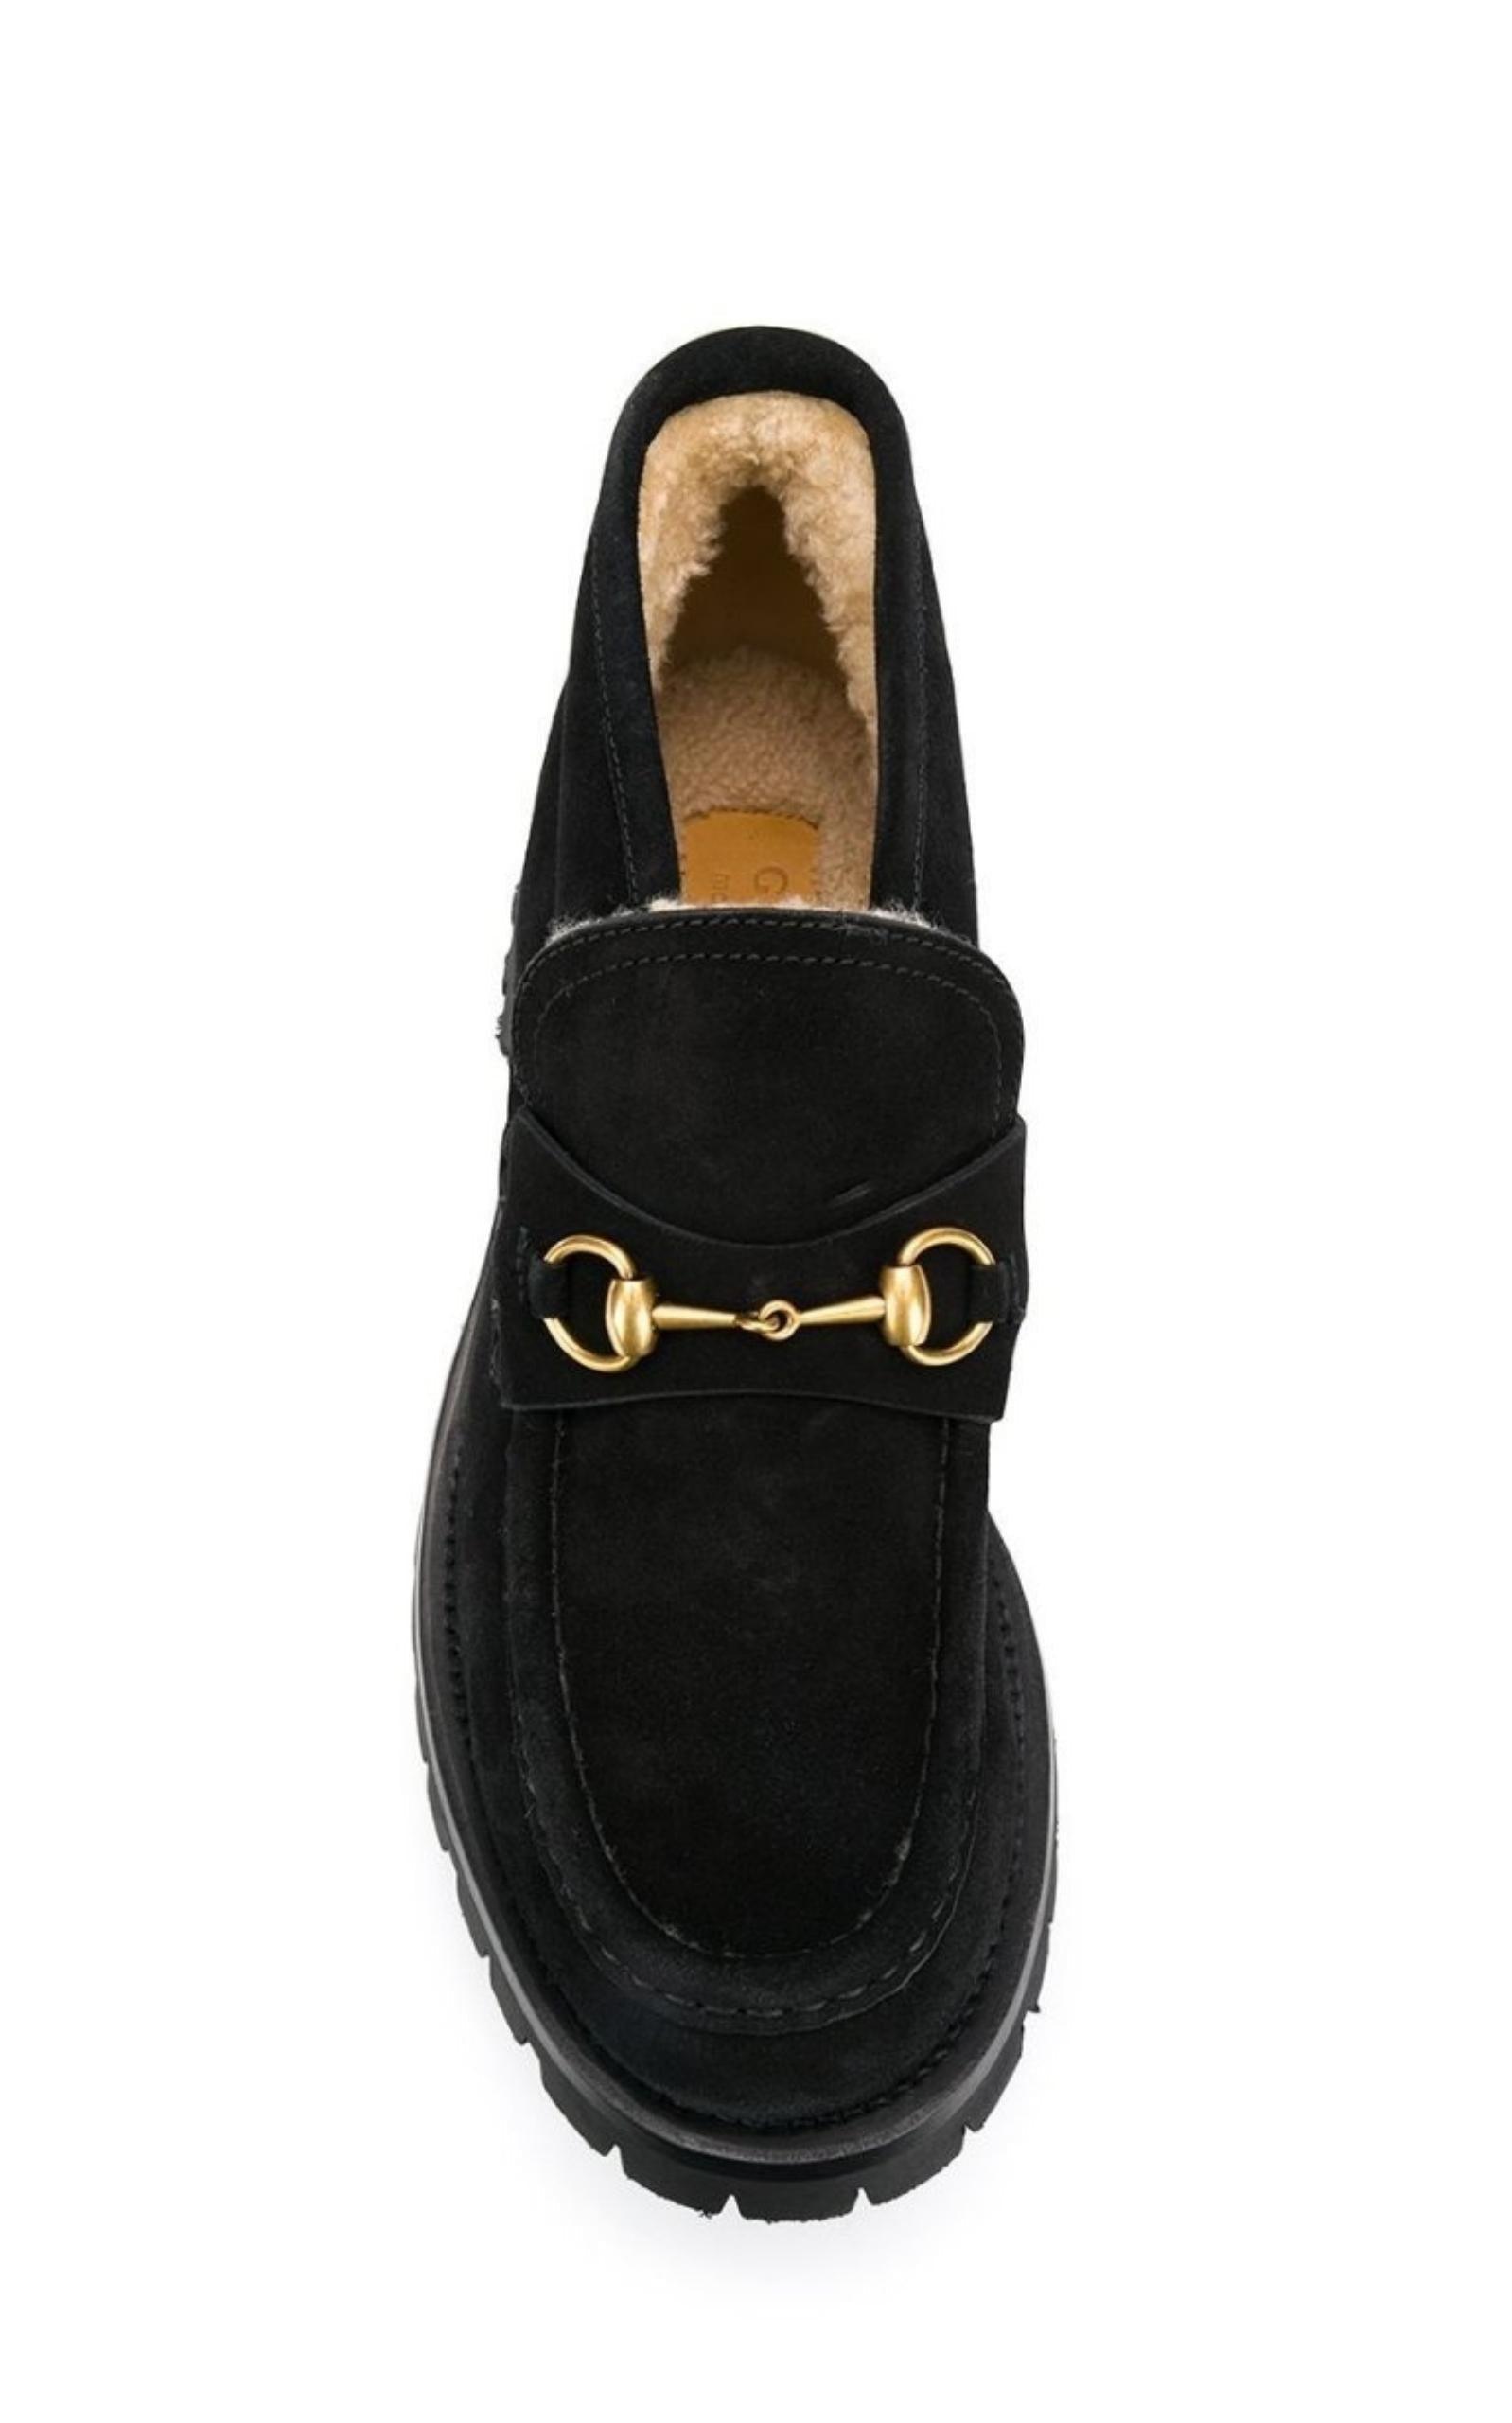  GucciShearling Lined Loafers - Runway Catalog